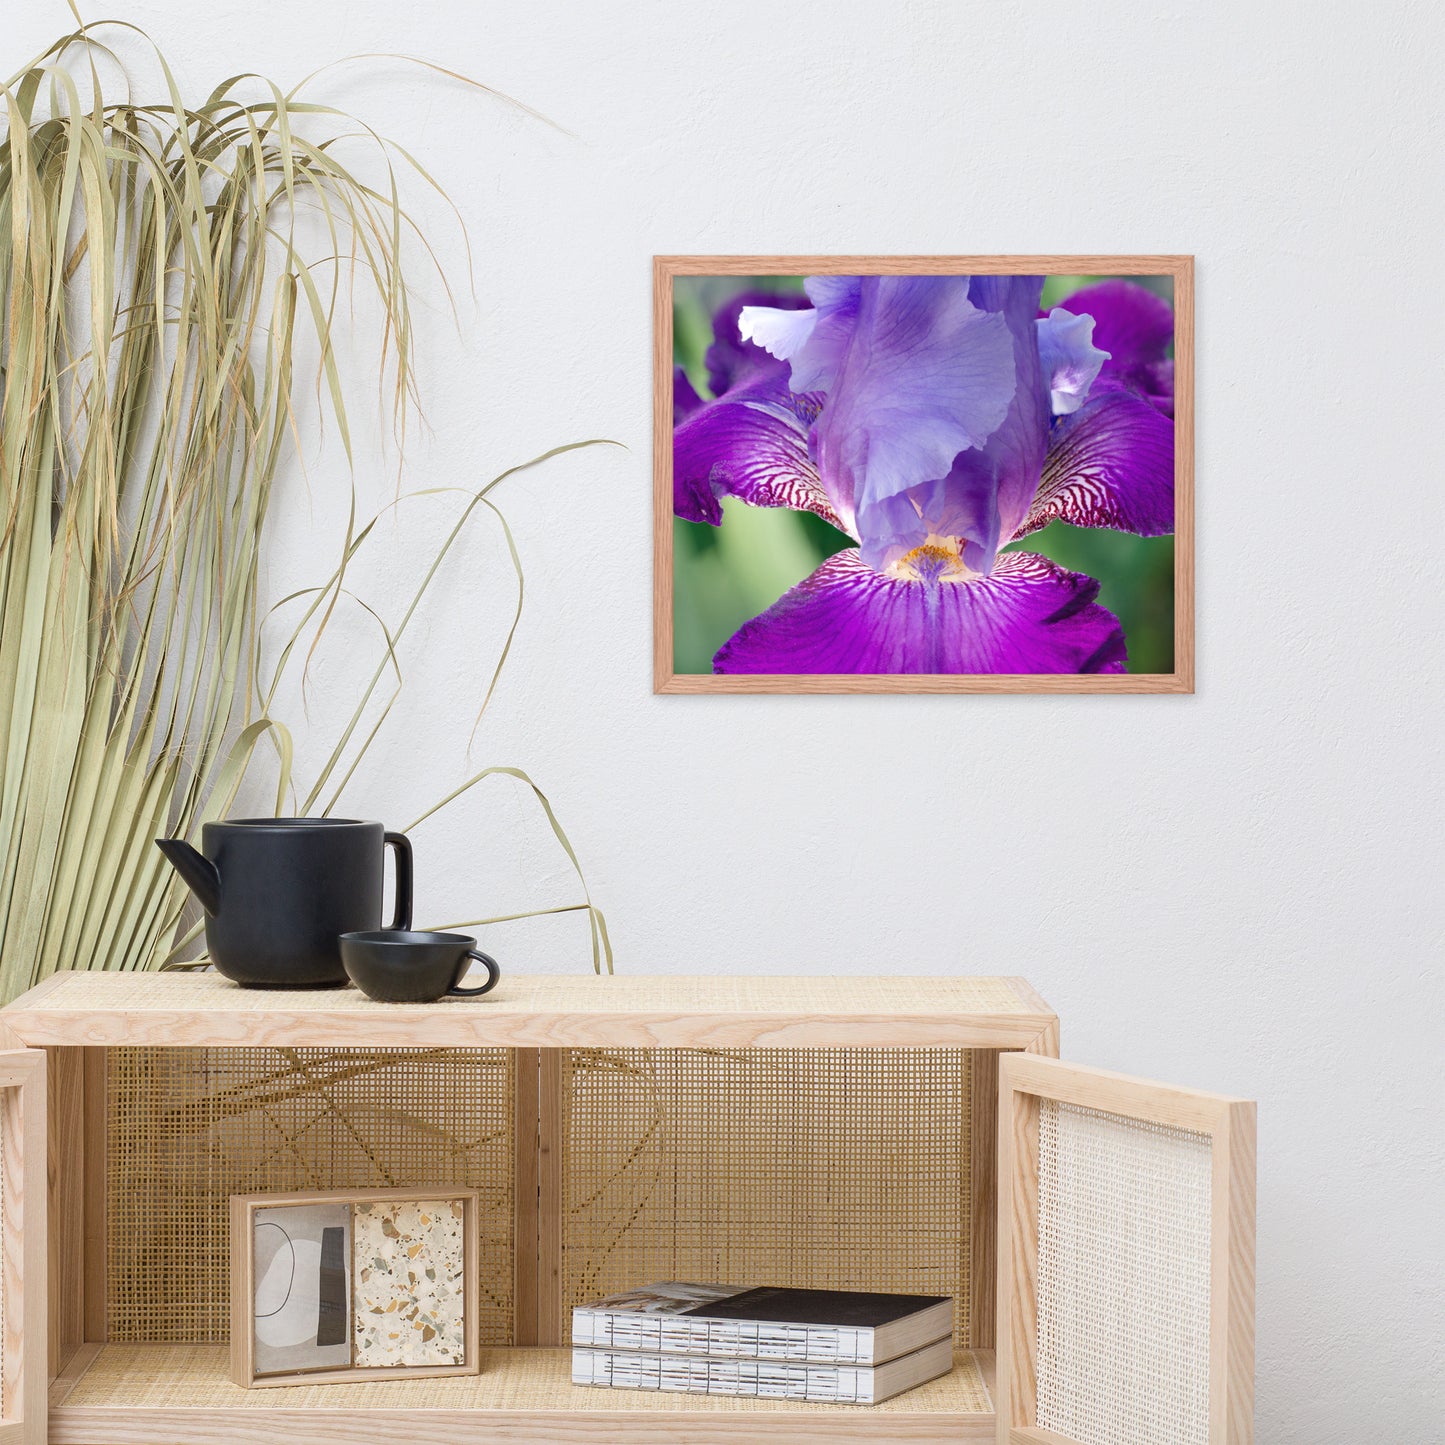 Pictures For Bedroom Wall Amazon: Glowing Iris - Floral / Botanical / Nature Photo Framed Wall Art Print - Artwork - Wall Decor - Modern Home Decor